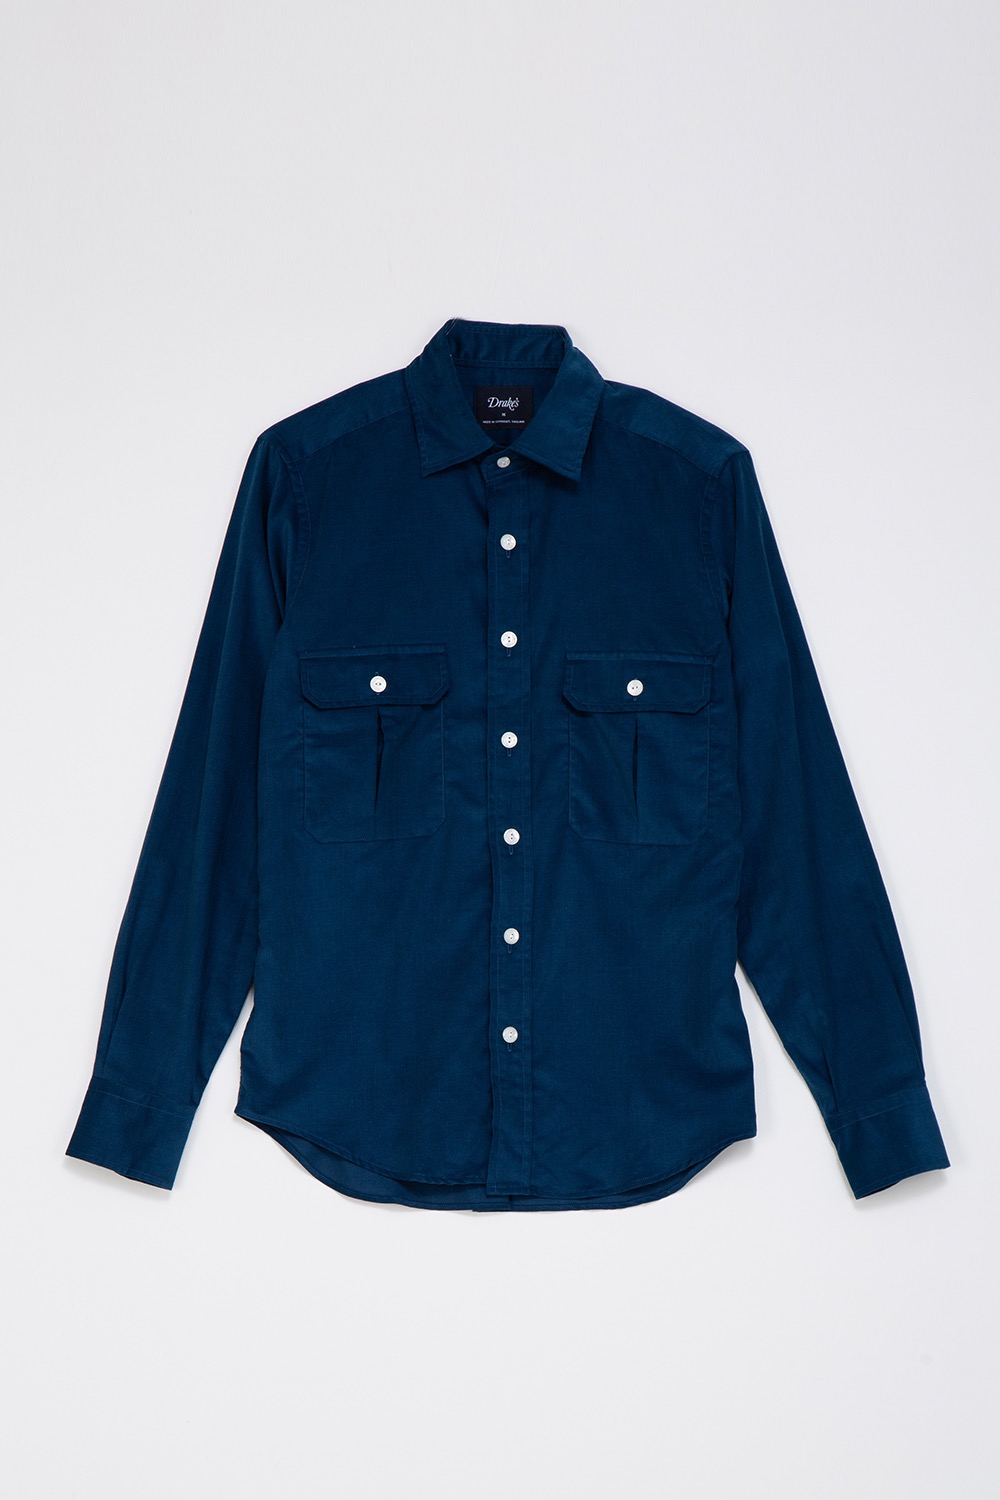 (CARRY OVER) THE WORK CORDUROY SHIRT